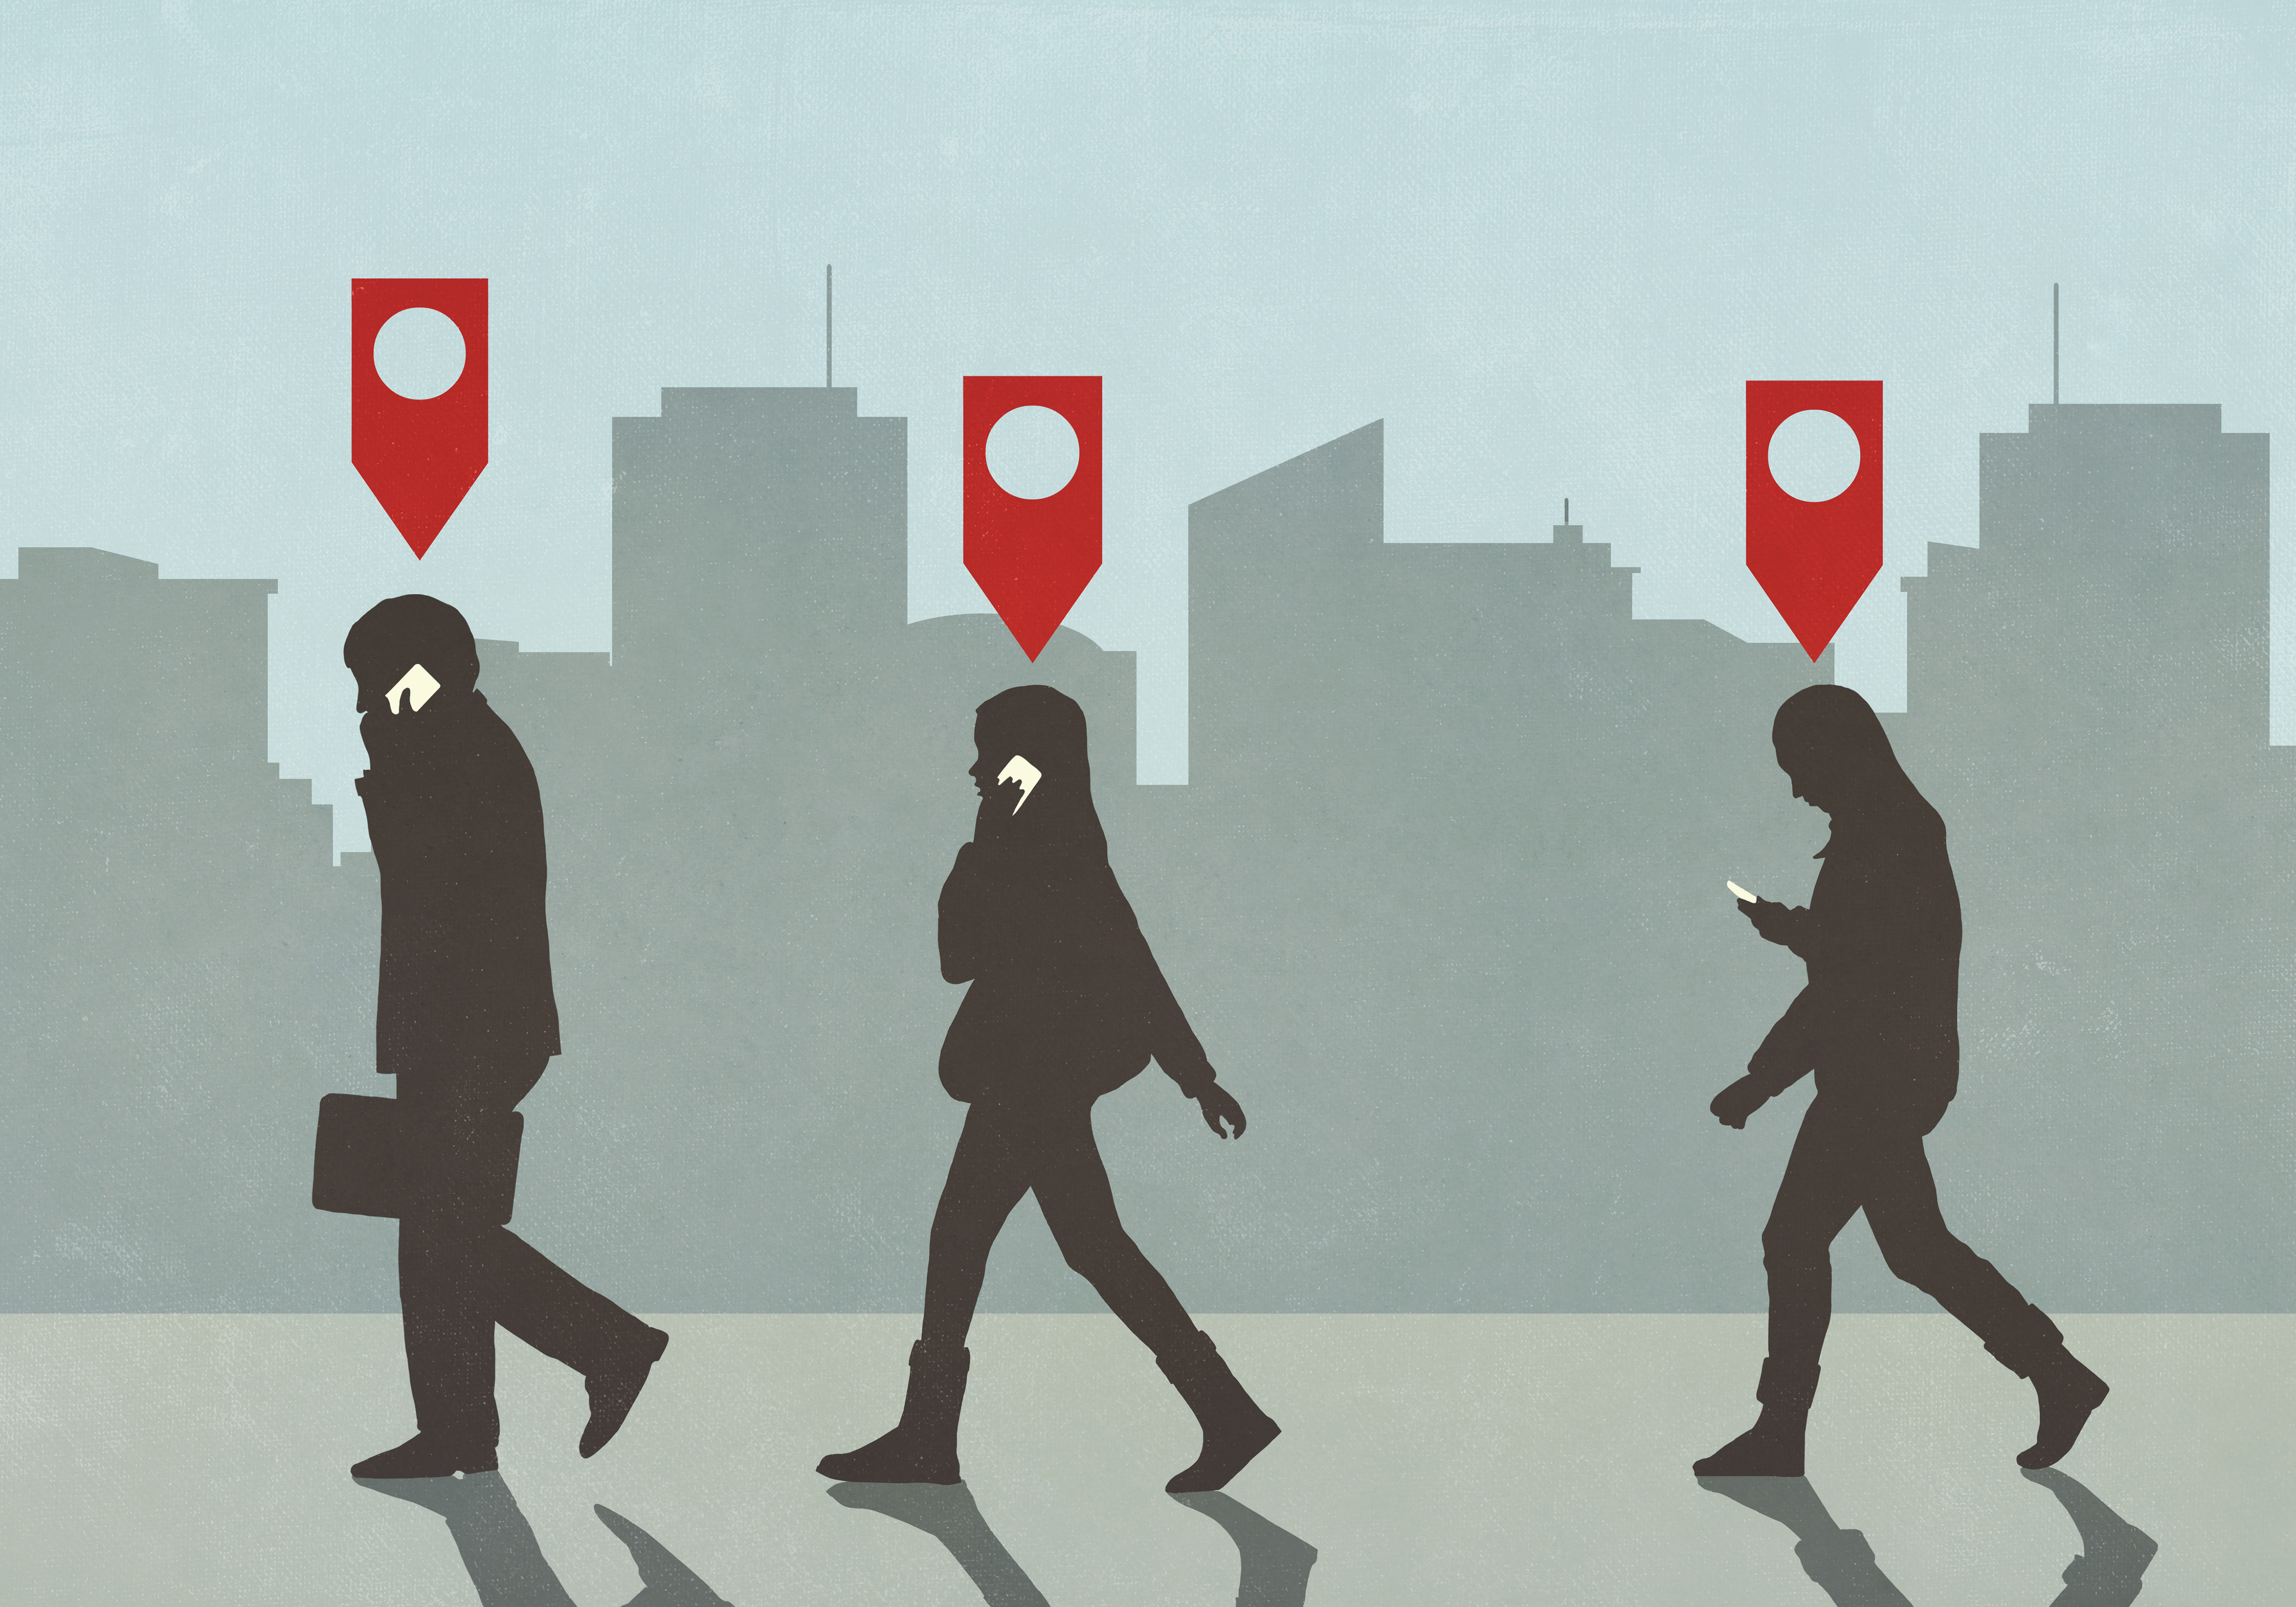 An illustration of three people in silhouette walking along a city street, each with a red arrow tag over their head.